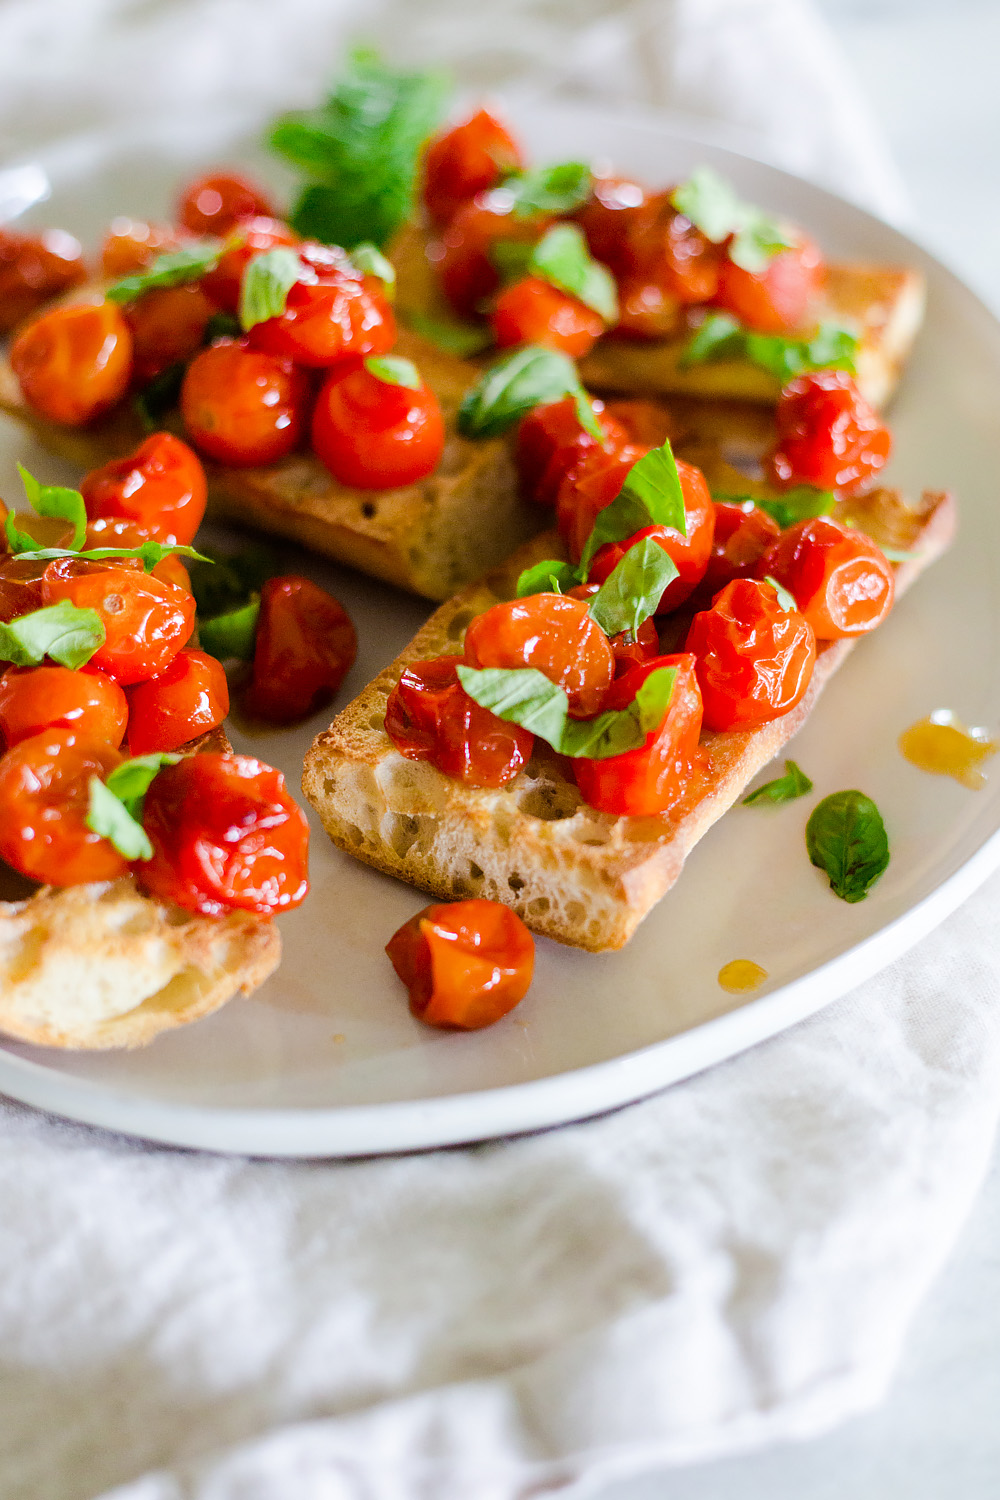 oven roasted tomatoes on toasted bread.